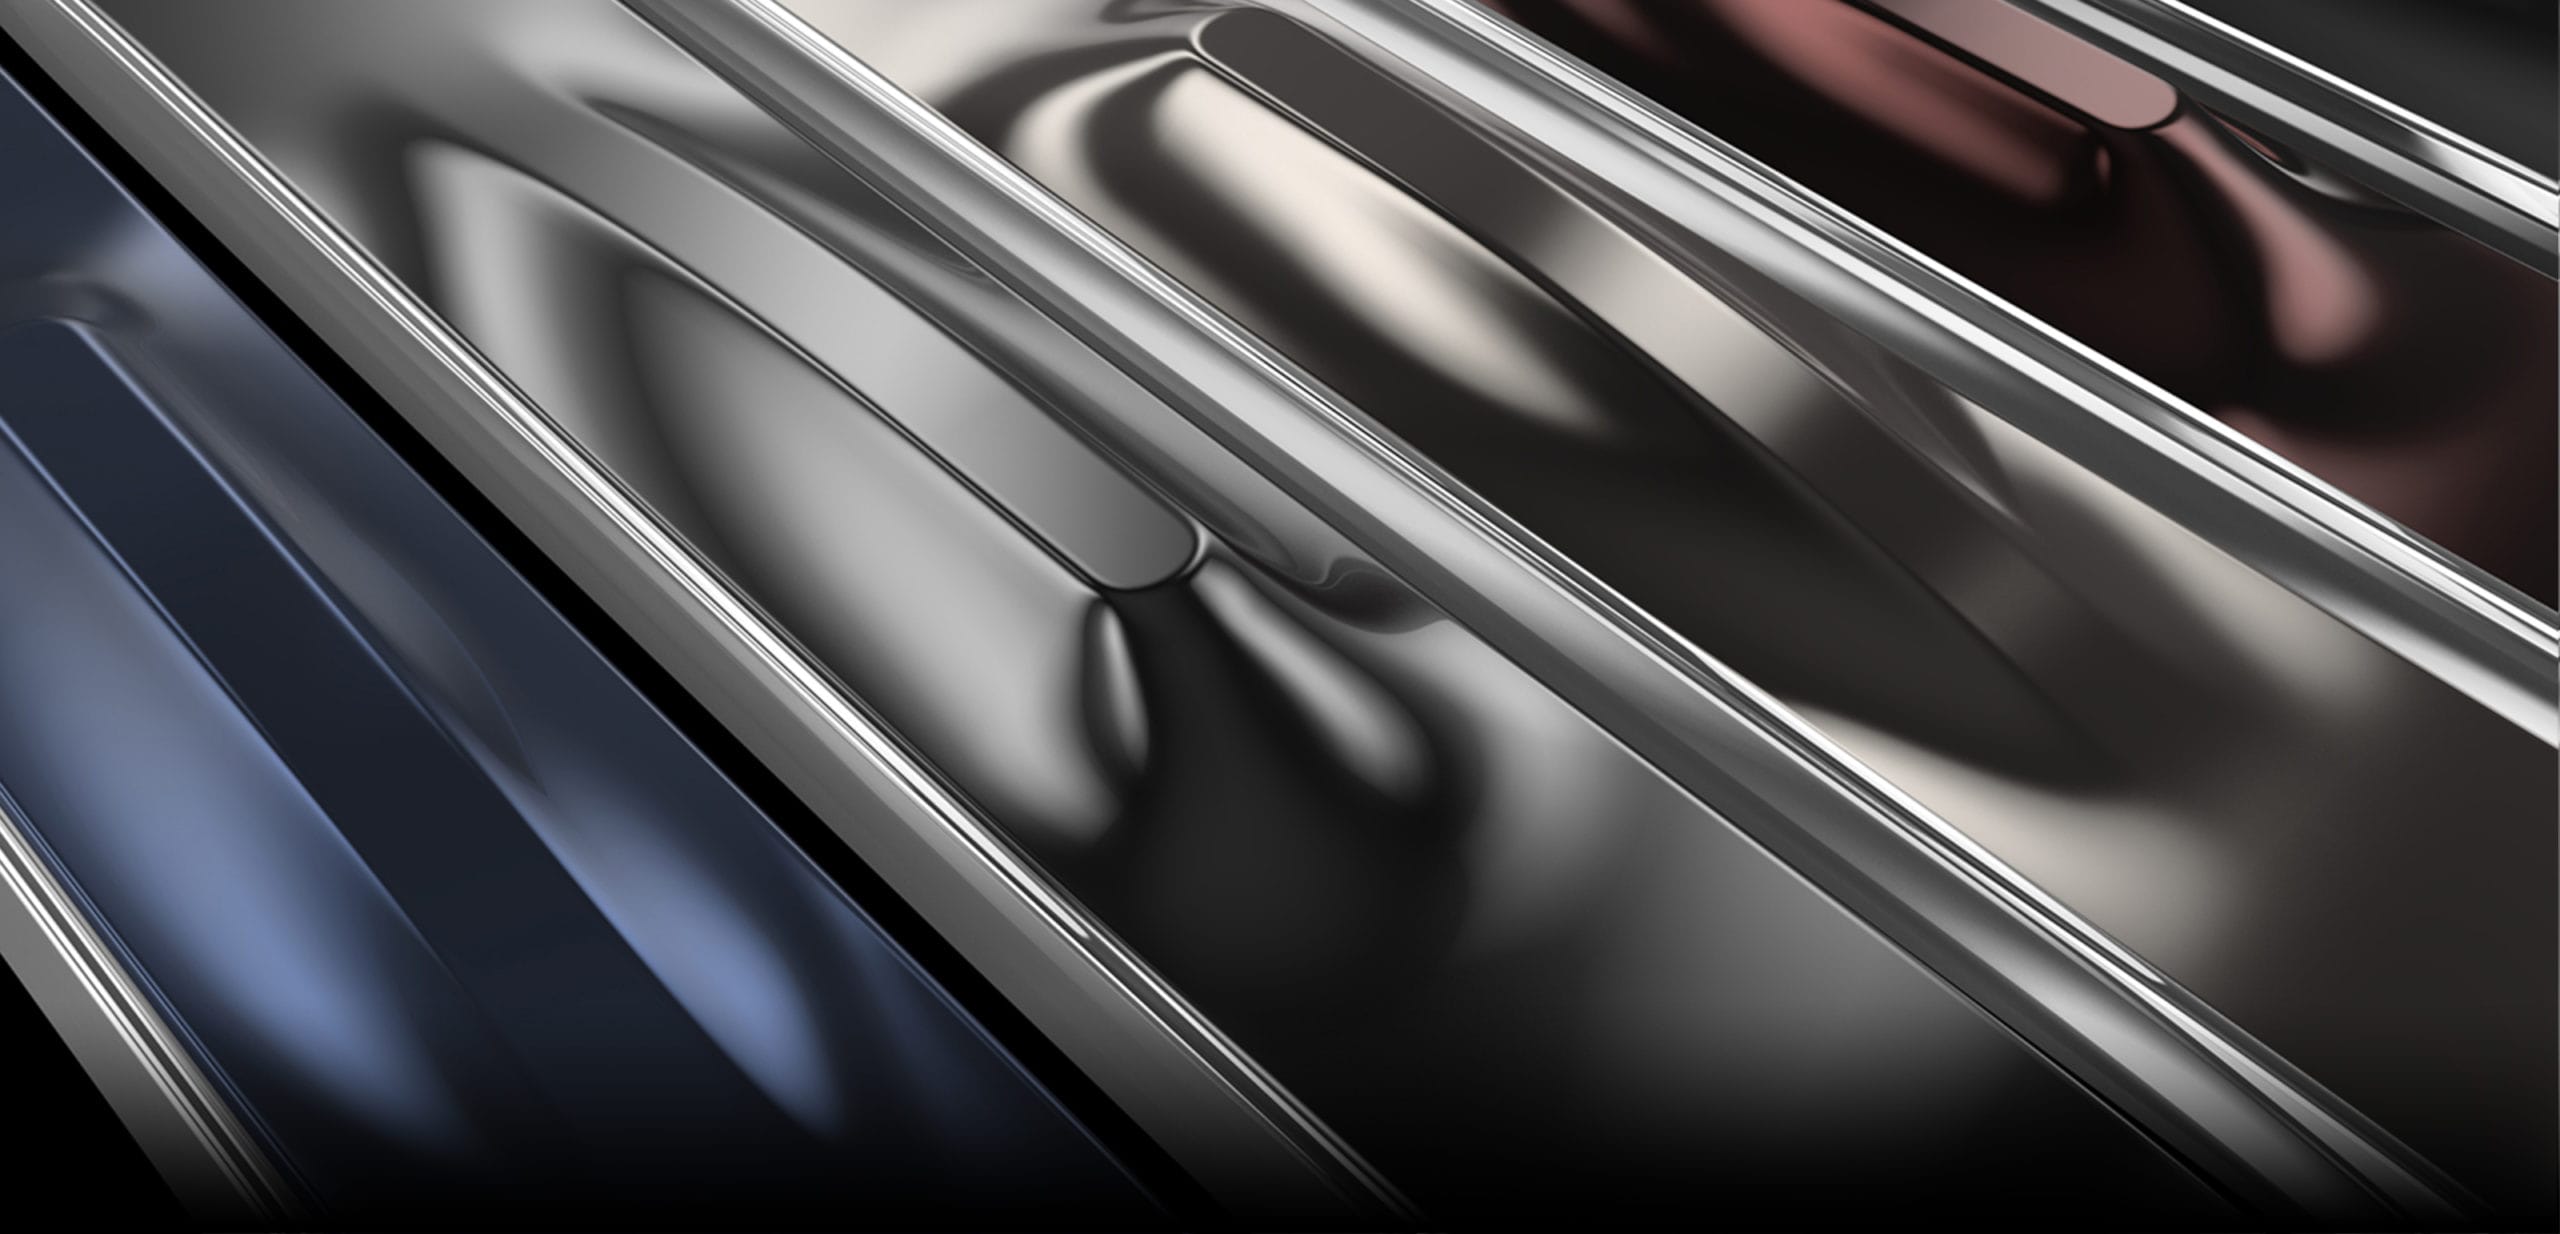 Selective Spinelle™ Metal Finishes